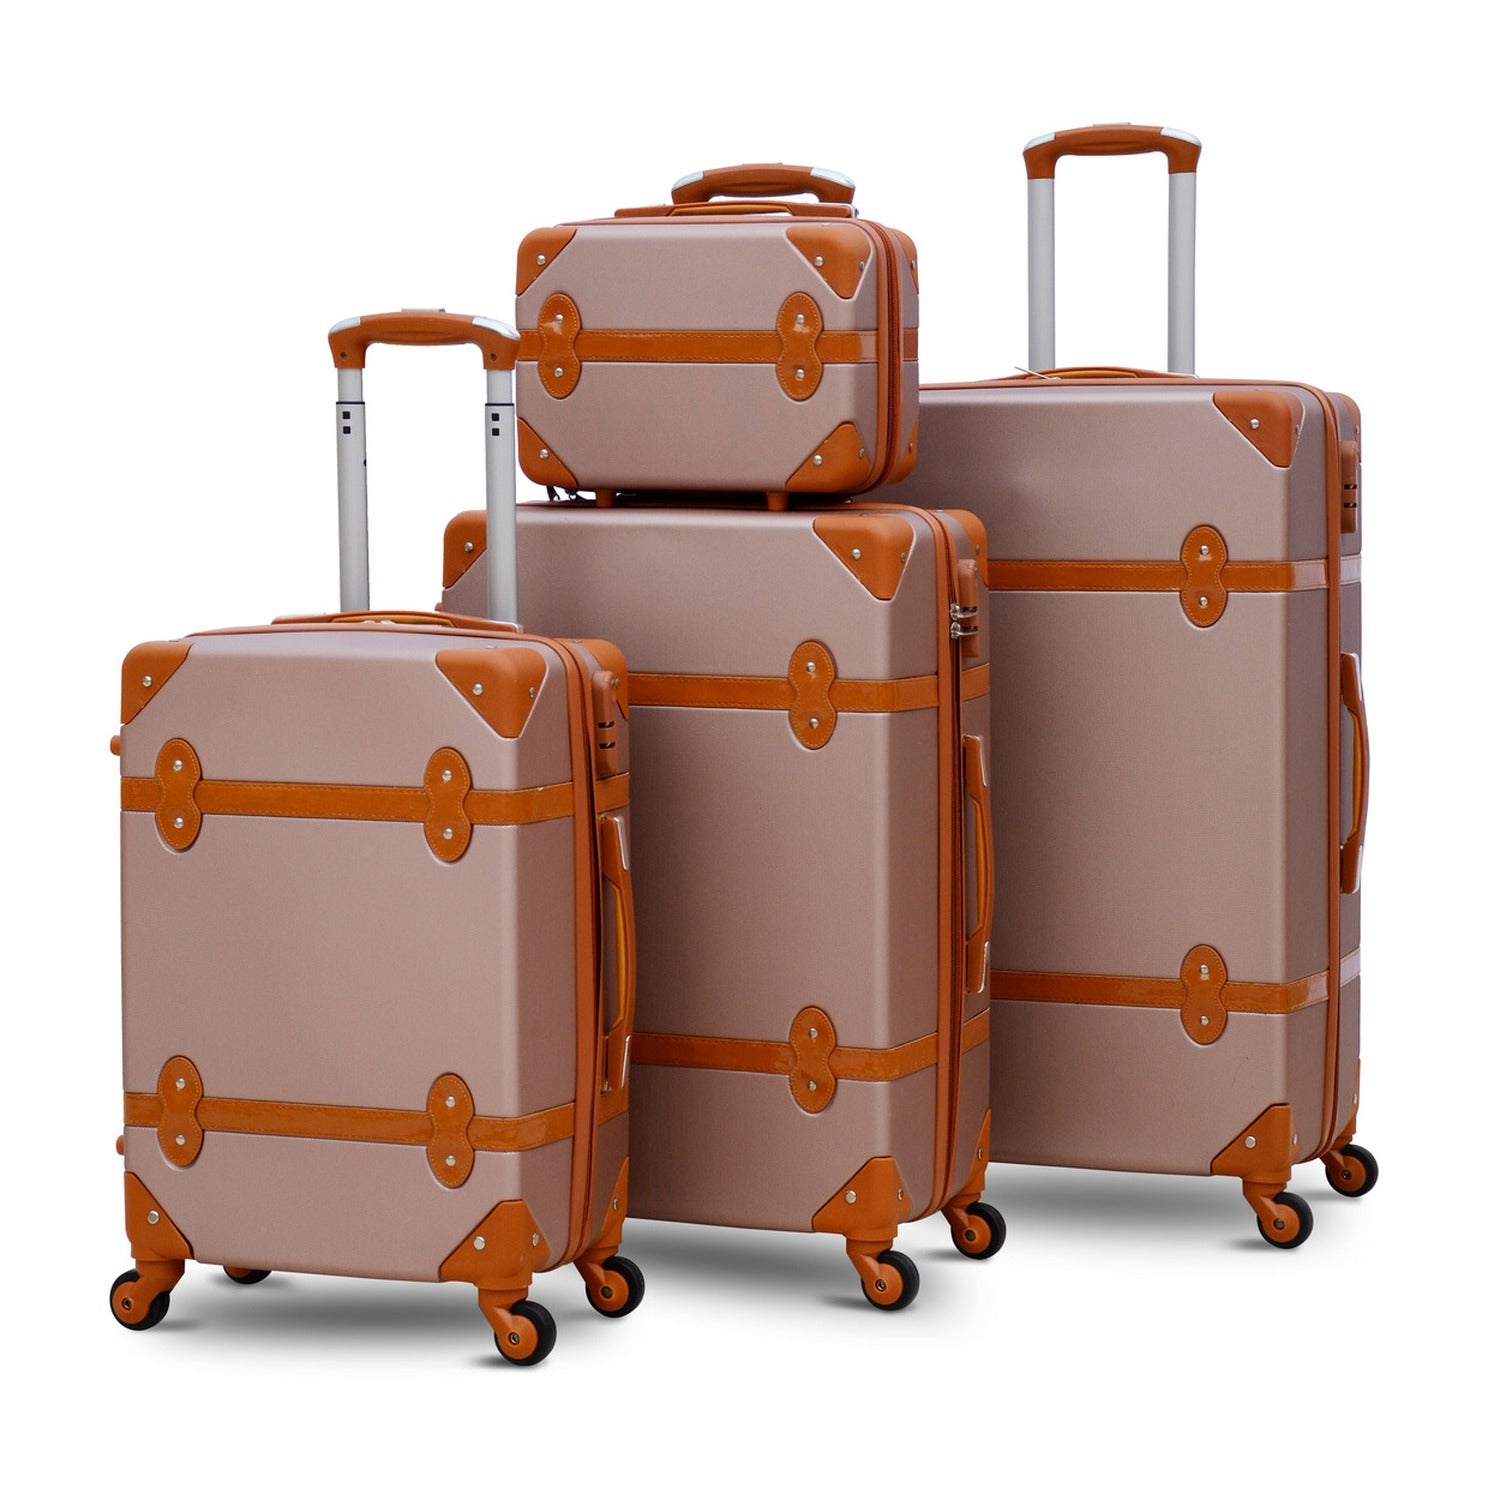 4 Piece Set 7" 20" 24" 28 Inches Corner Guard ABS Lightweight Luggage Bag with Spinner Wheel